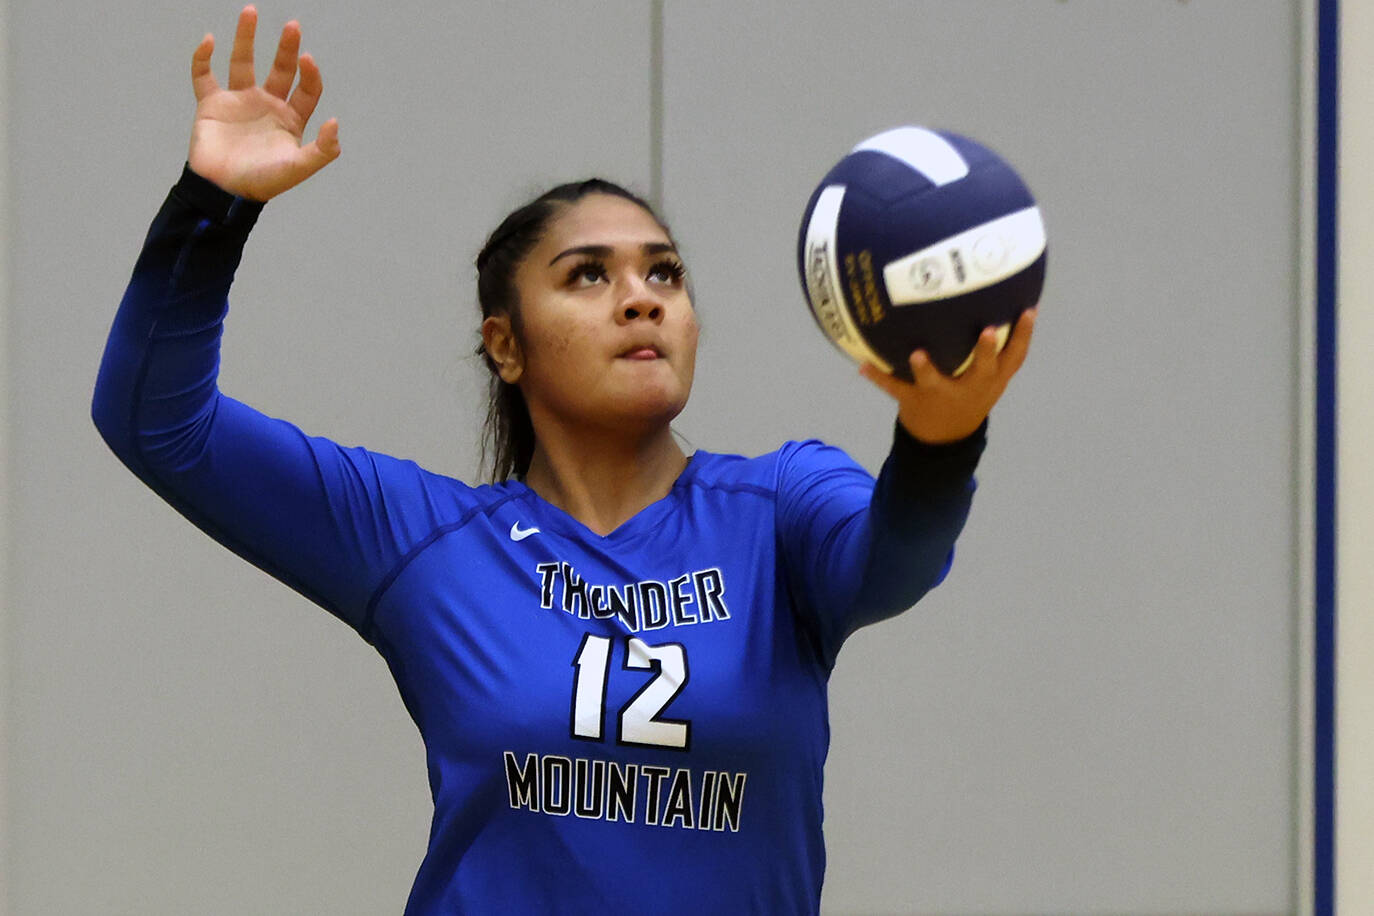 Senior Moana Tuvifale scored the most aces over the weekend as TMHS hosted the Kayhi Lady Kings. (Juneau Empire / Ben Hohenstatt)